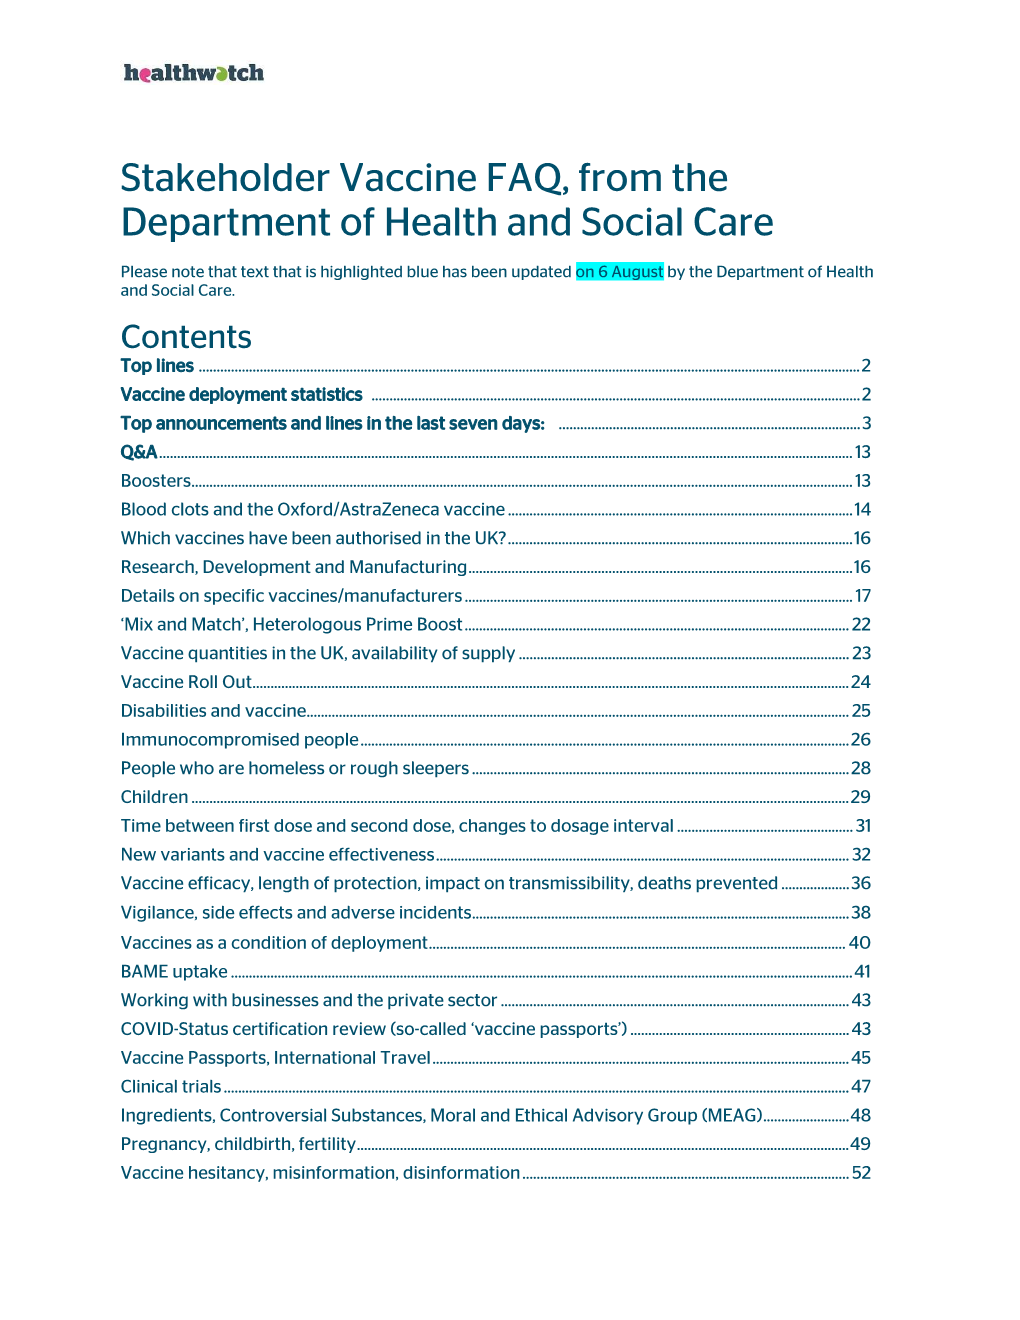 Stakeholder Vaccine FAQ, from the Department of Health and Social Care